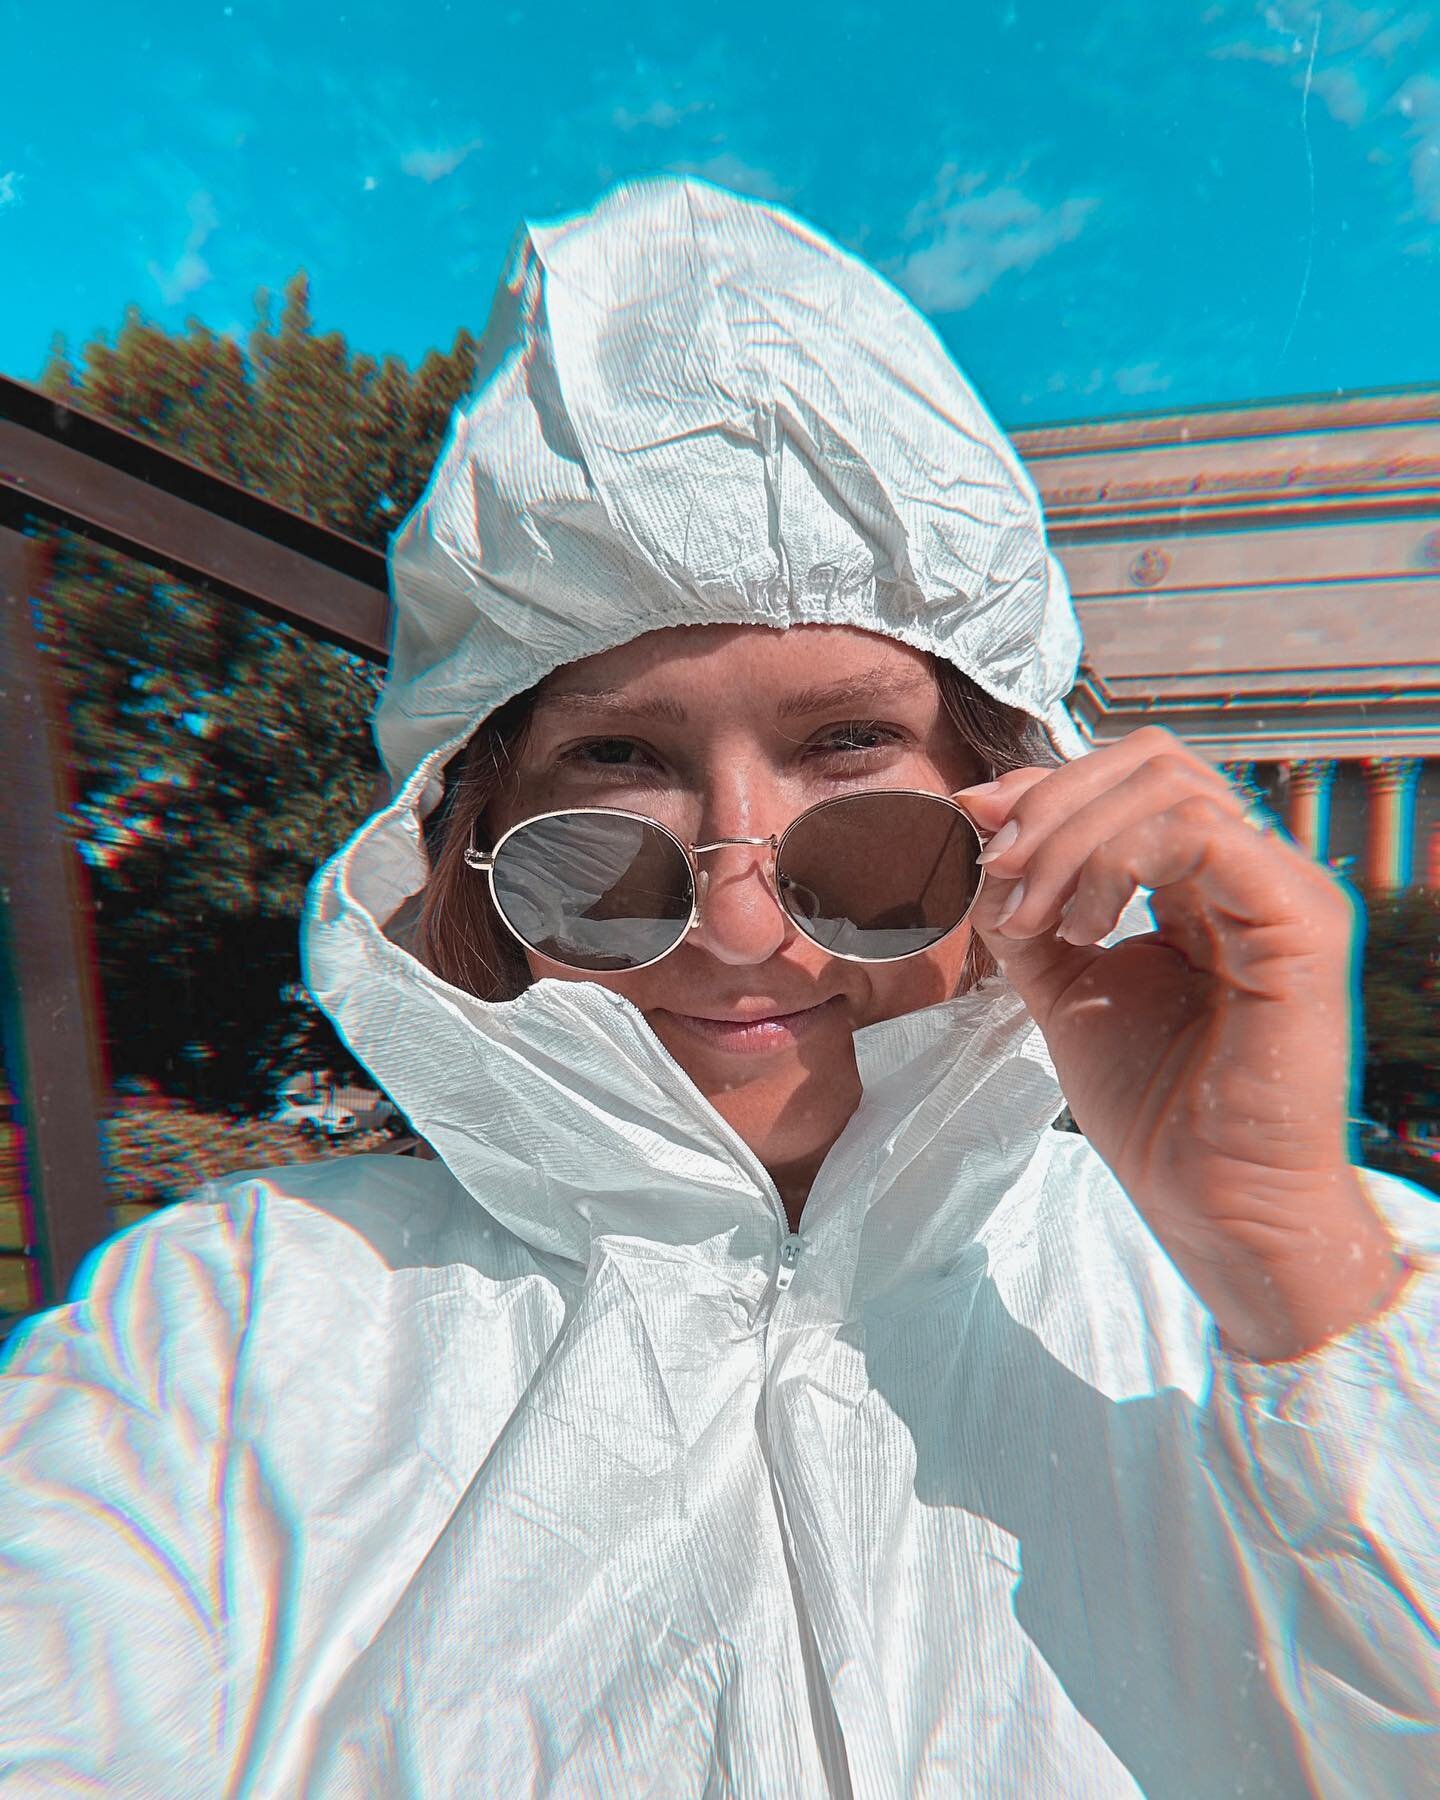 Workin the workwear lewk 😎 in a head-to-toe tyvek suit. 

We&rsquo;re decked out for a slightly messier outdoor sculpture treatment in the National Gallery of Art Sculpture Garden @ngadc as we perform annual maintenance on the intentionally rusted s